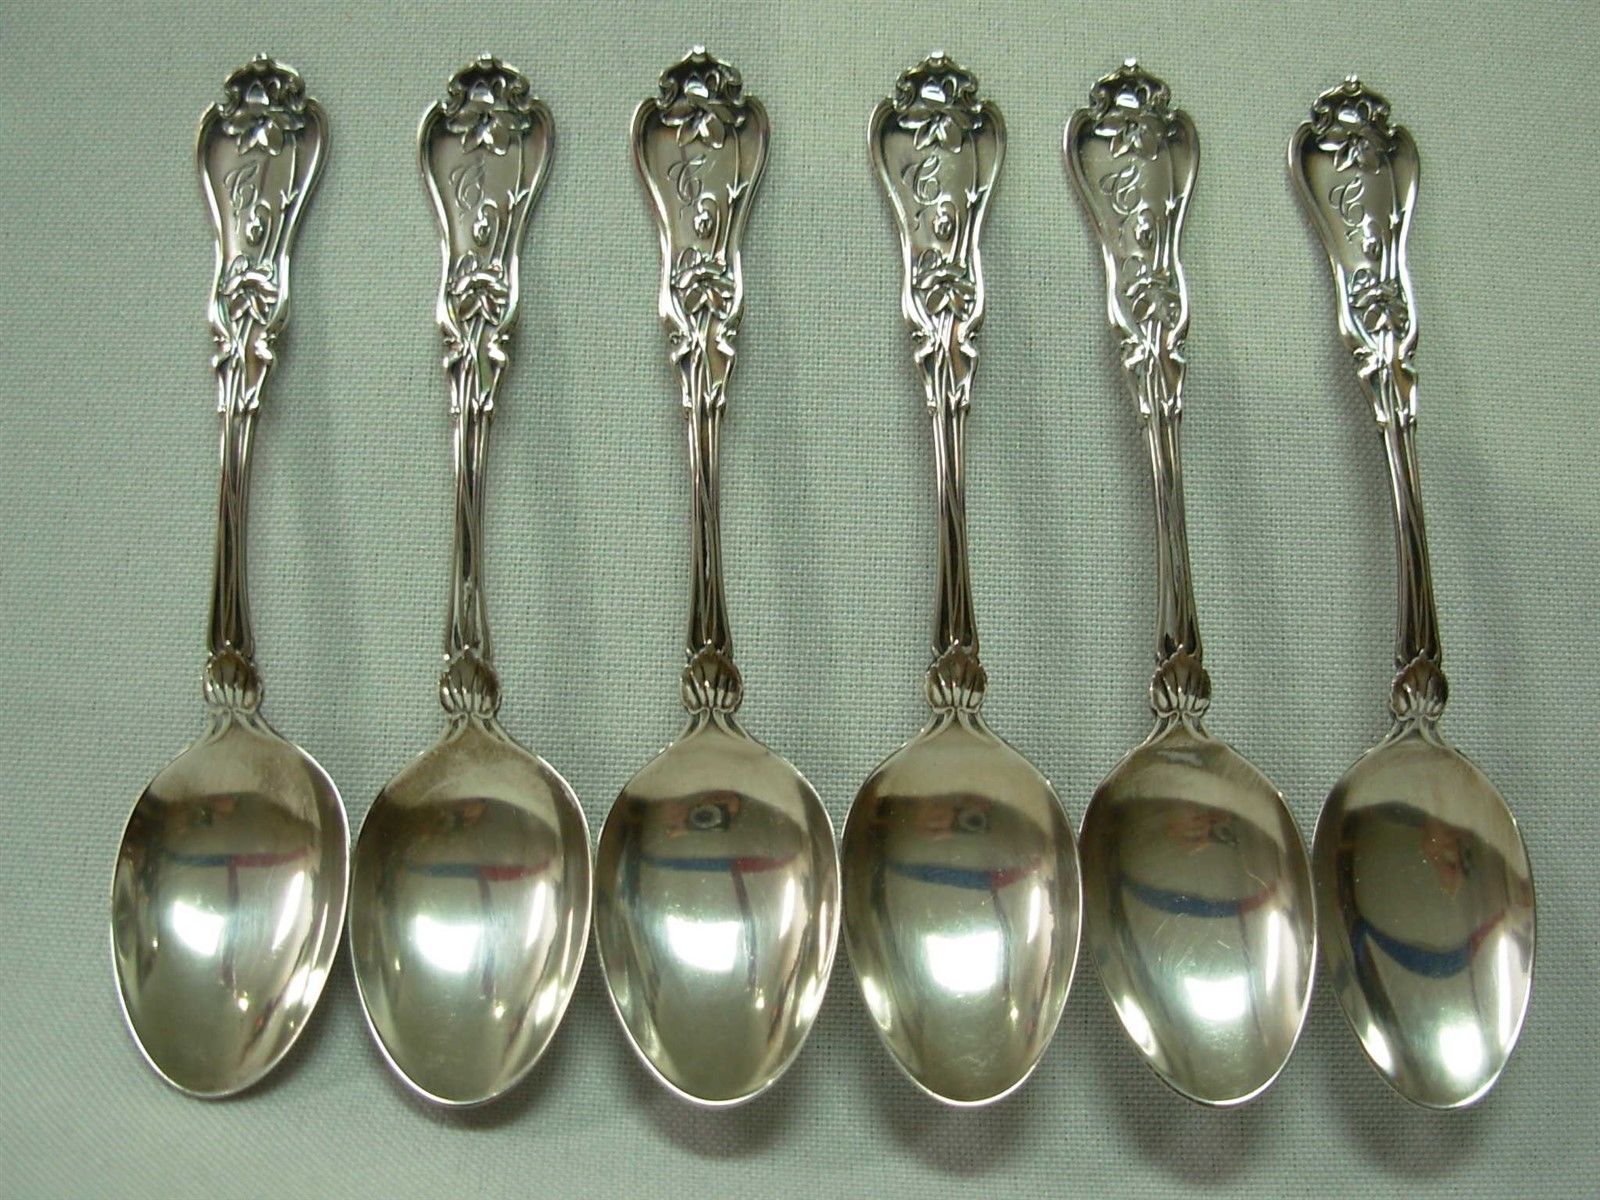 6 RARE ANTIQUE WHITING MFG STERLING SILVER "VIOLET" 4" DEMITASSE COFFEE SPOONS